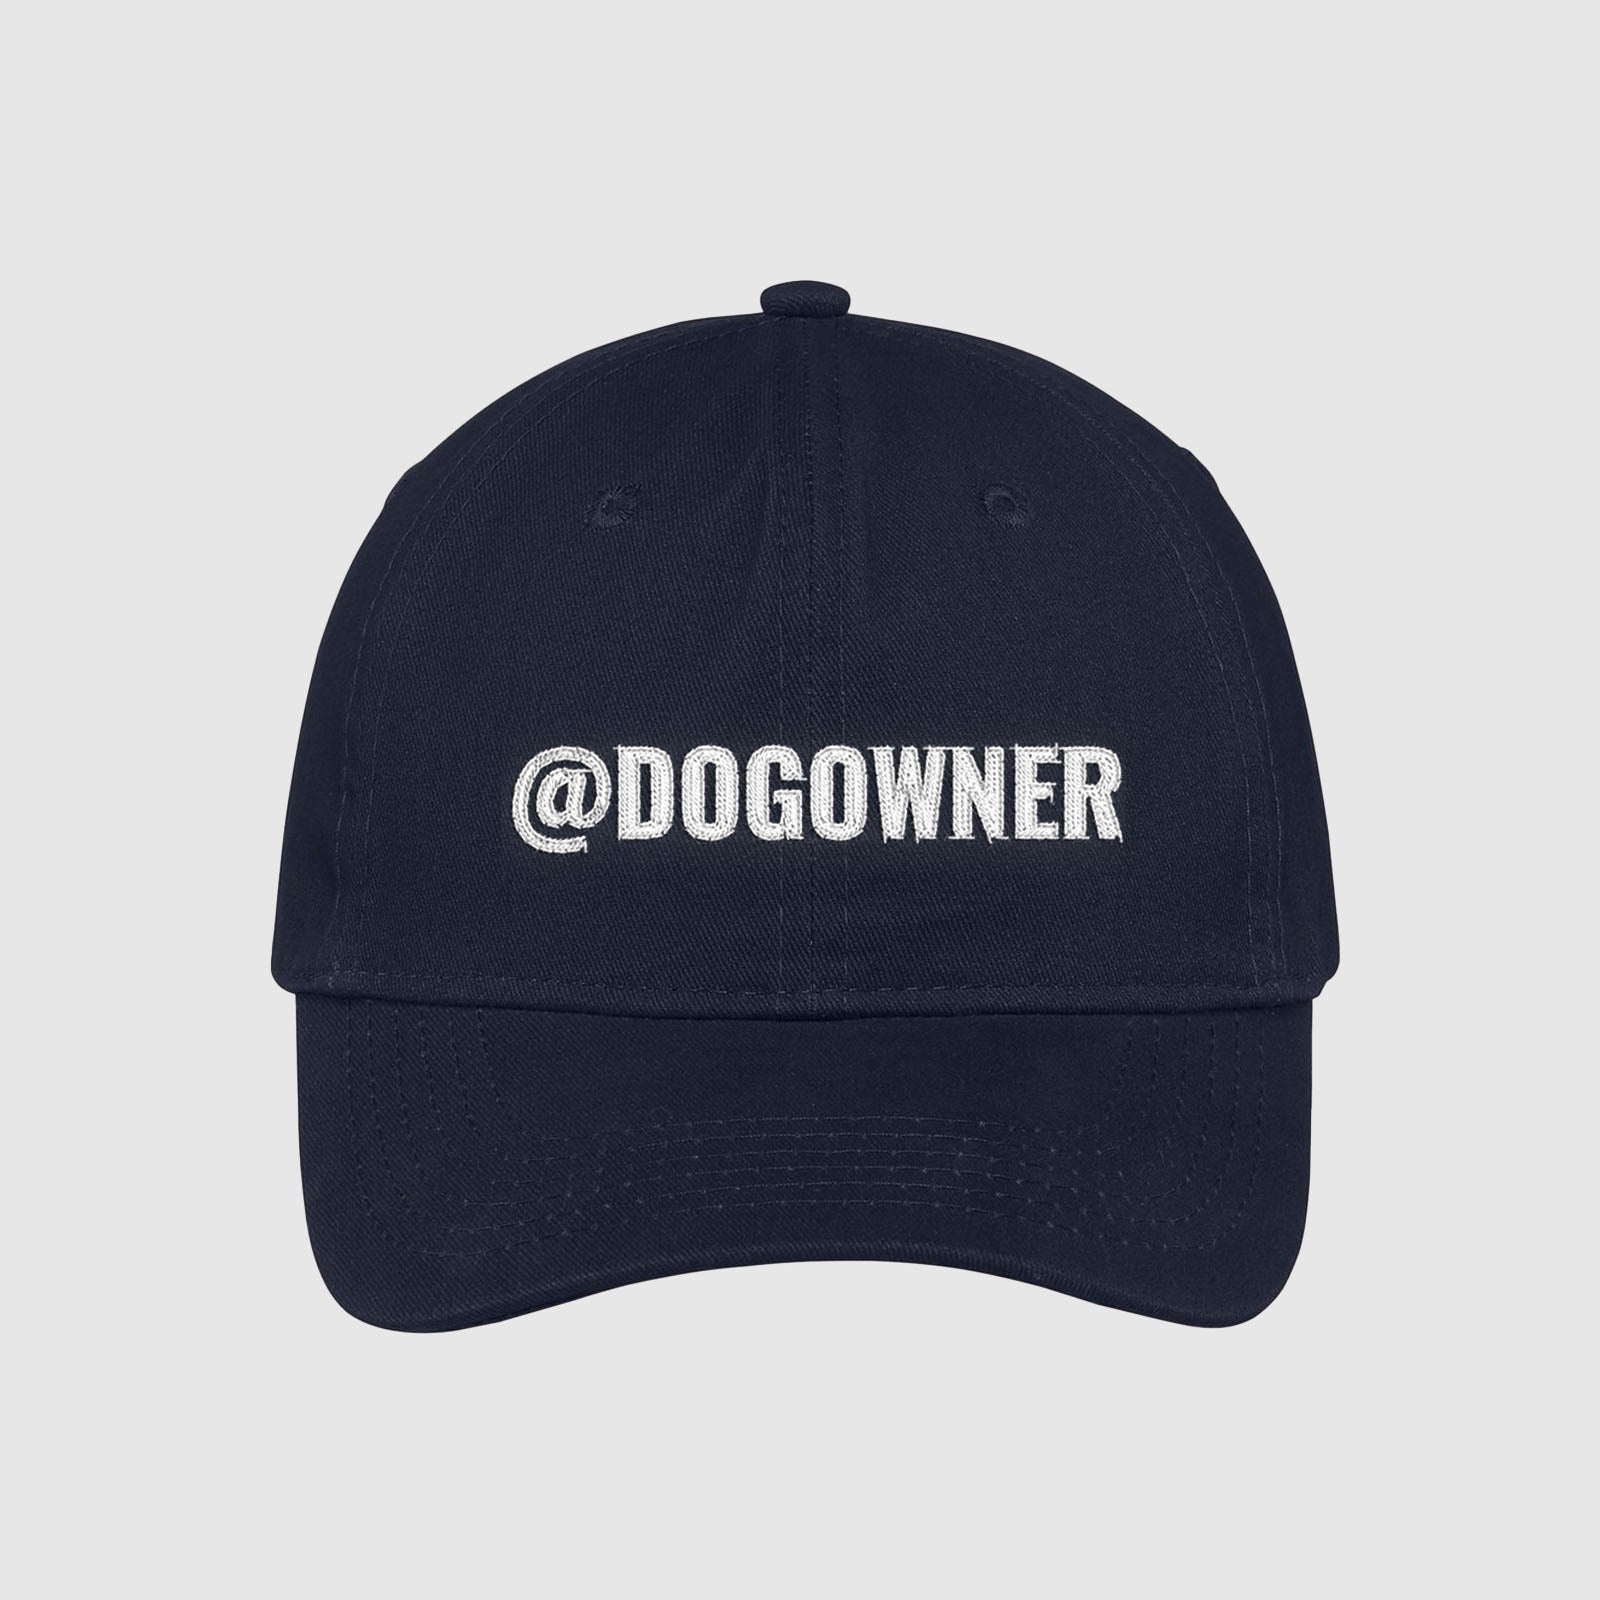 Navy customizable hat with your social media handle embroidered on the front.